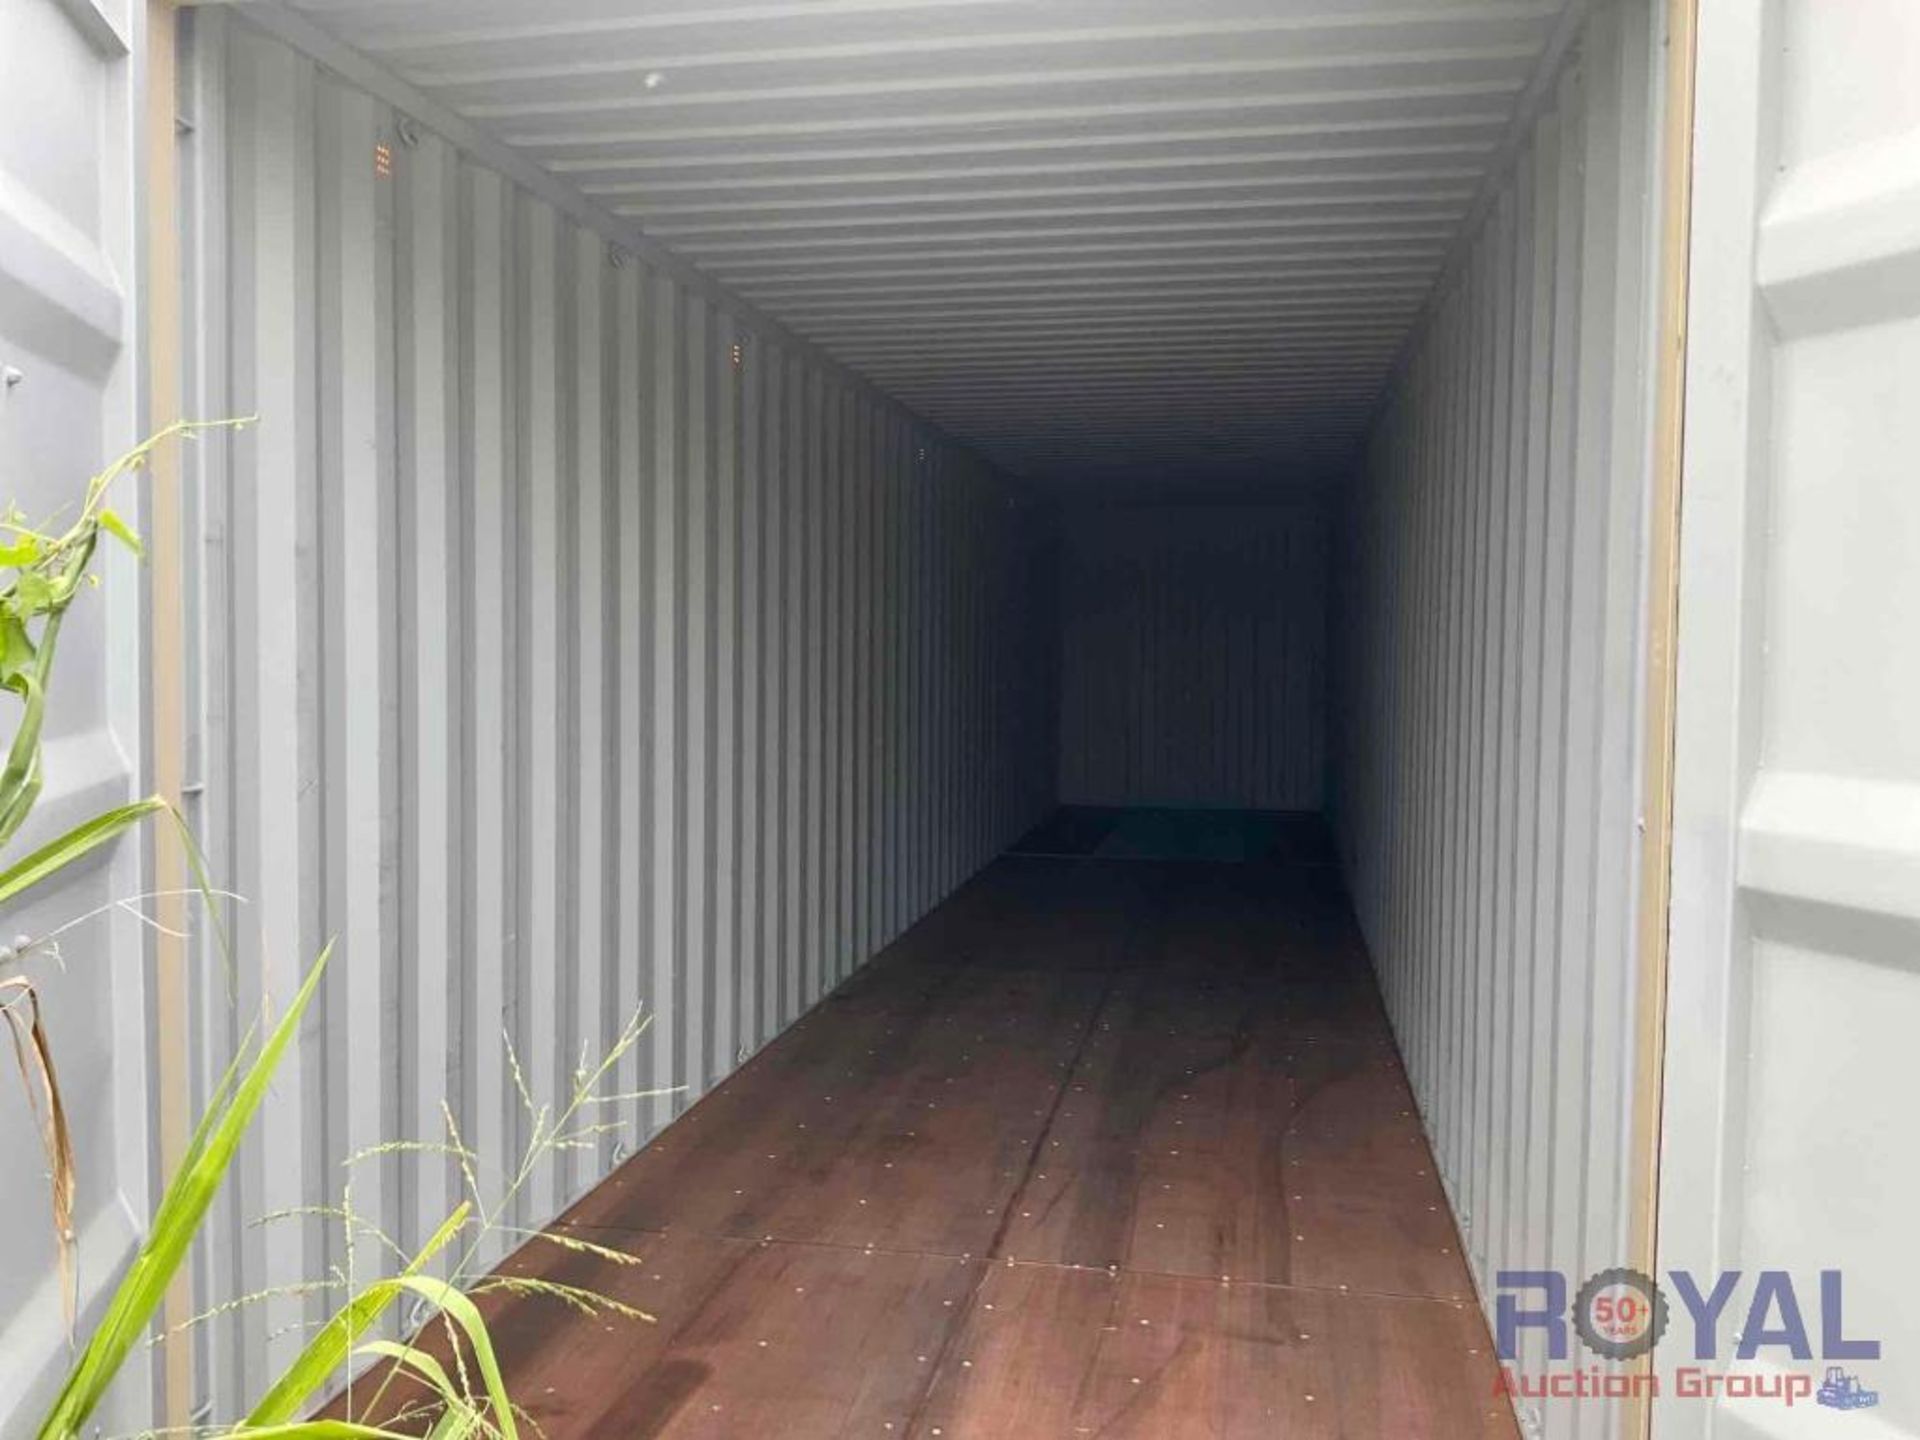 40ft. One Time Use Shipping Container - Image 4 of 7